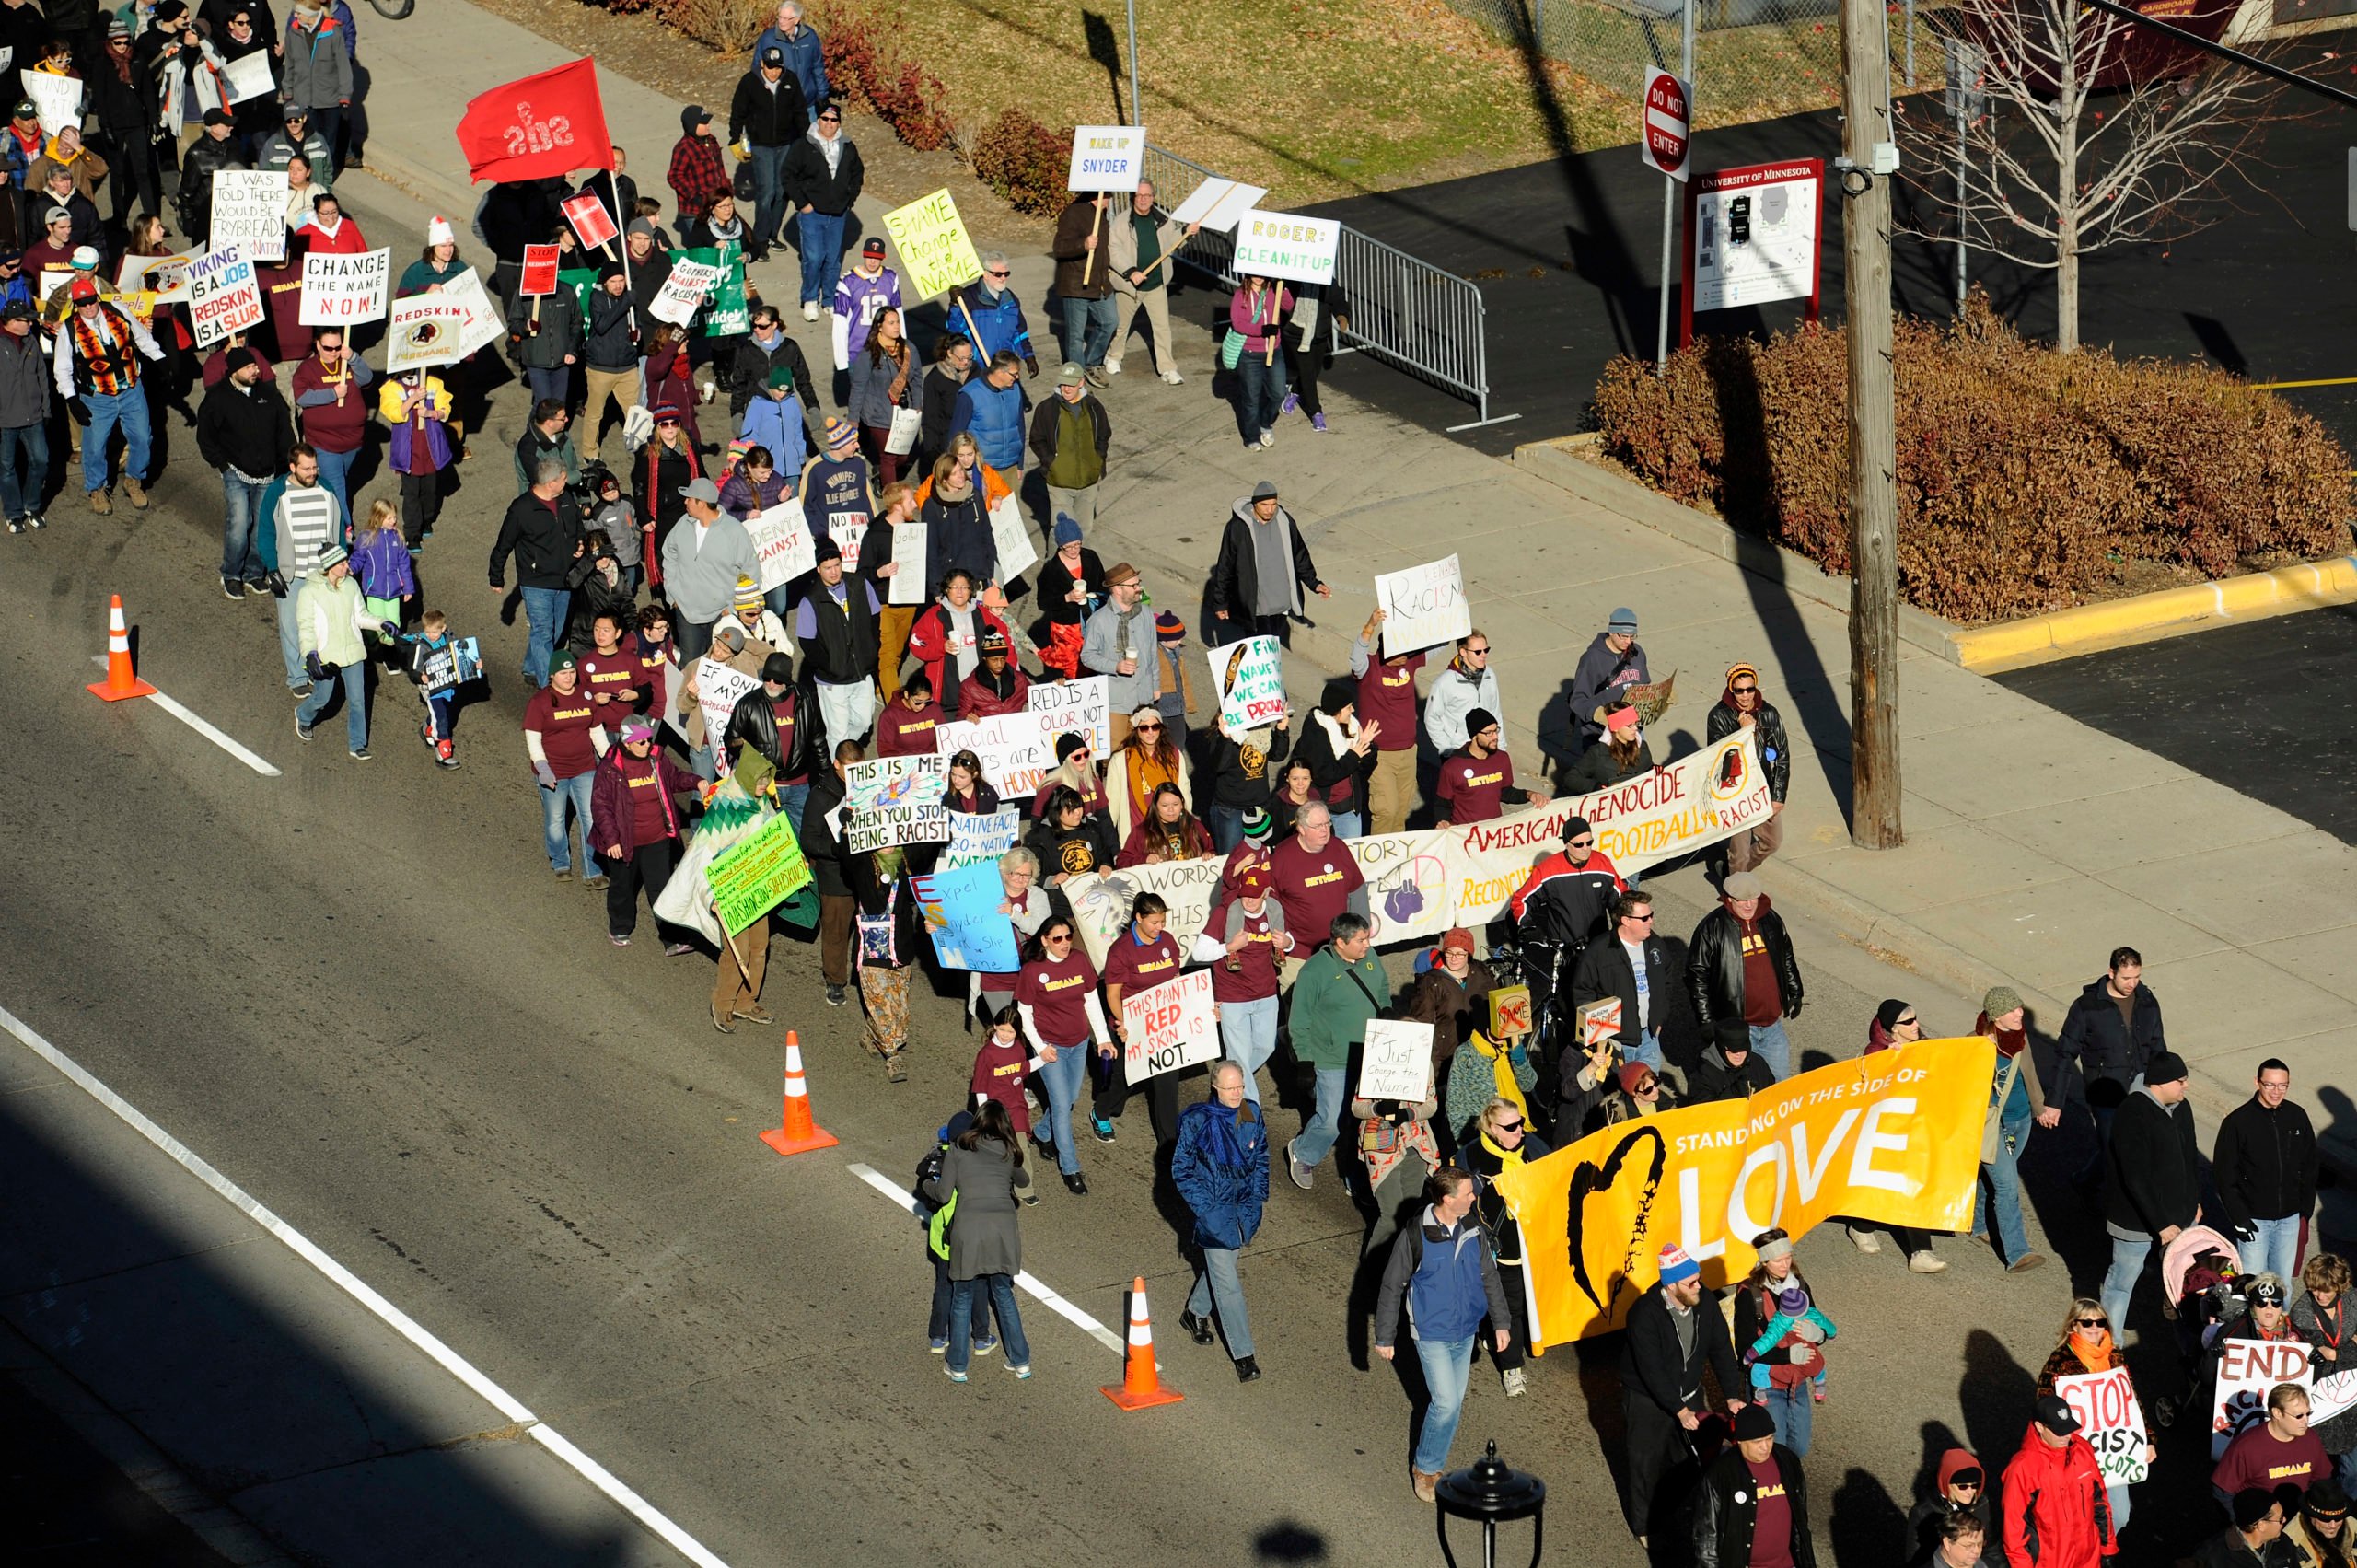 People march to TCF Bank Stadium to protest against the mascot for the Washington Redskins before the game against the Minnesota Vikings on November 2, 2014 in Minneapolis, Minnesota. Opponents of the Redskins name believe it's a slur that mocks Native American culture and they want the team to change it. (Photo by Hannah Foslien/Getty Images)